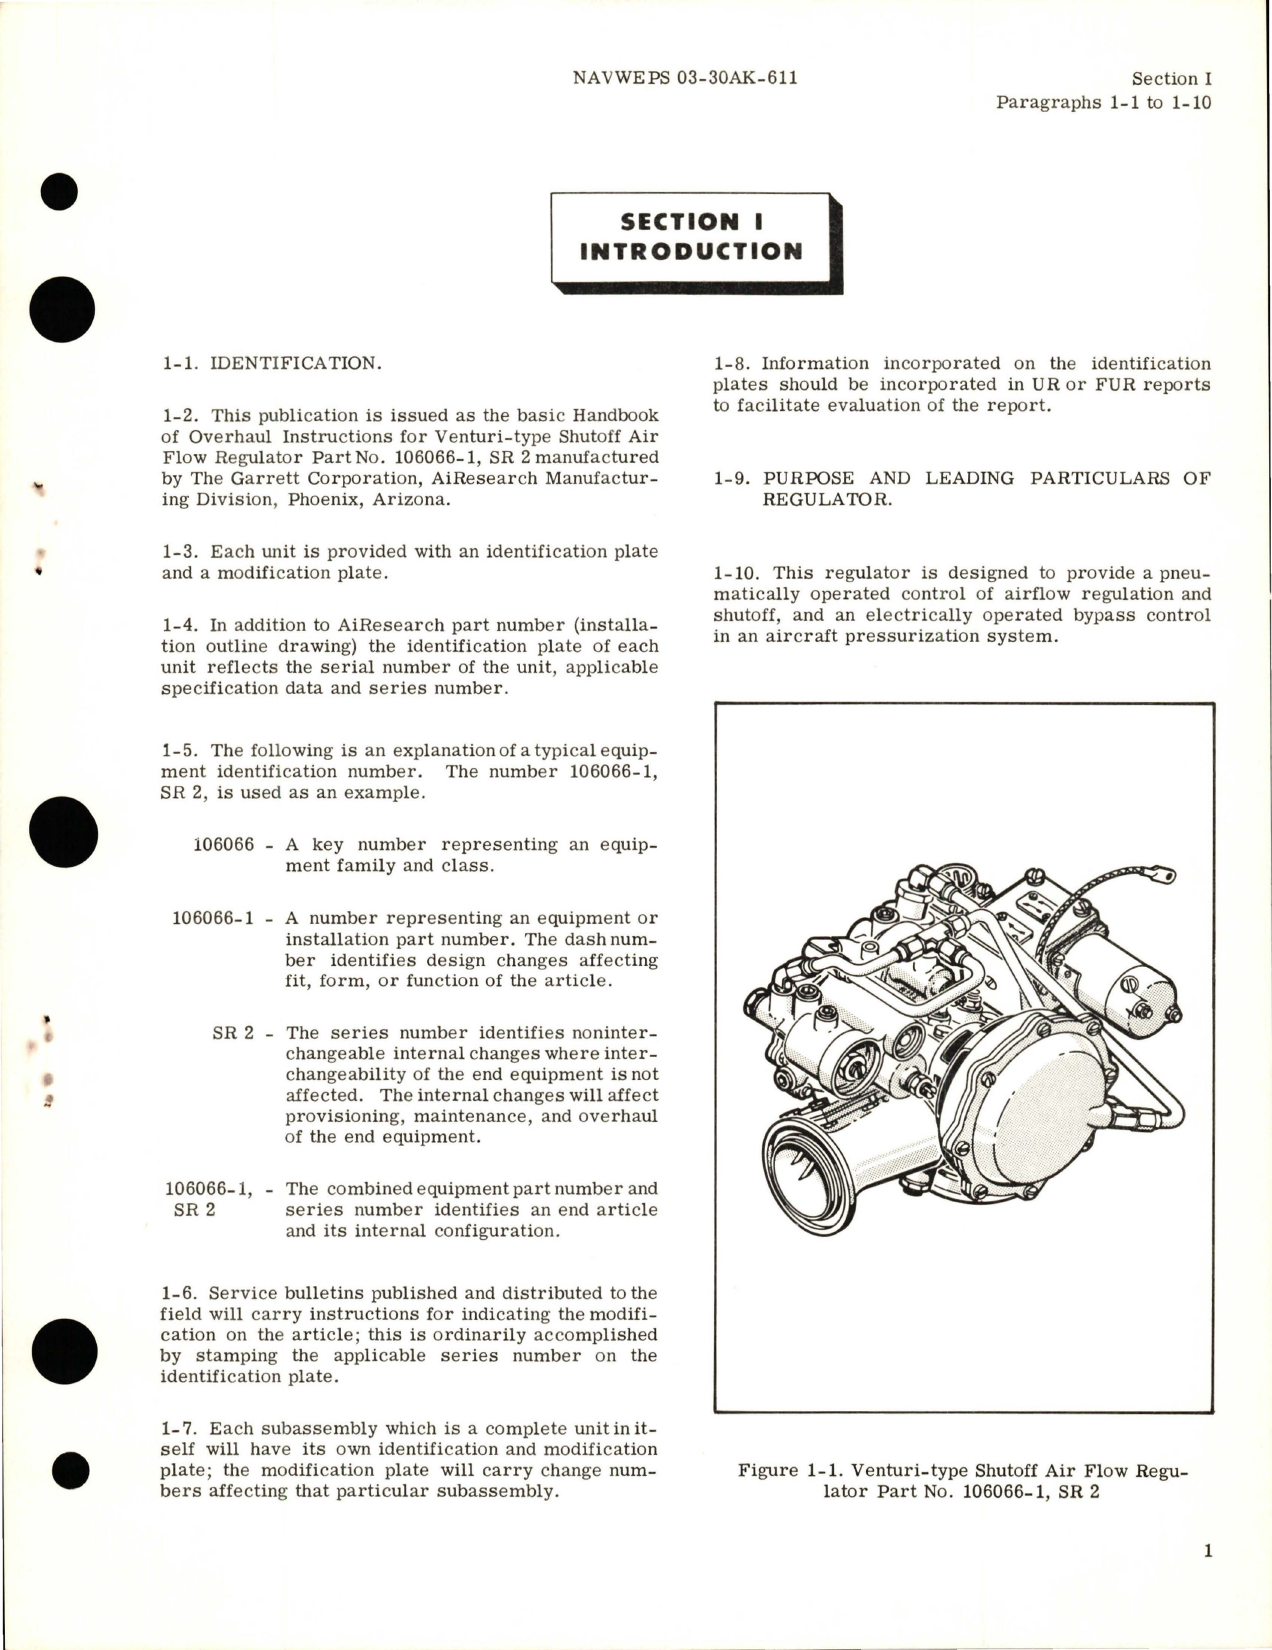 Sample page 5 from AirCorps Library document: Overhaul Instructions for Venturi-Type Shutoff Air Flow Regulator - Part 106066-1, SR 2 